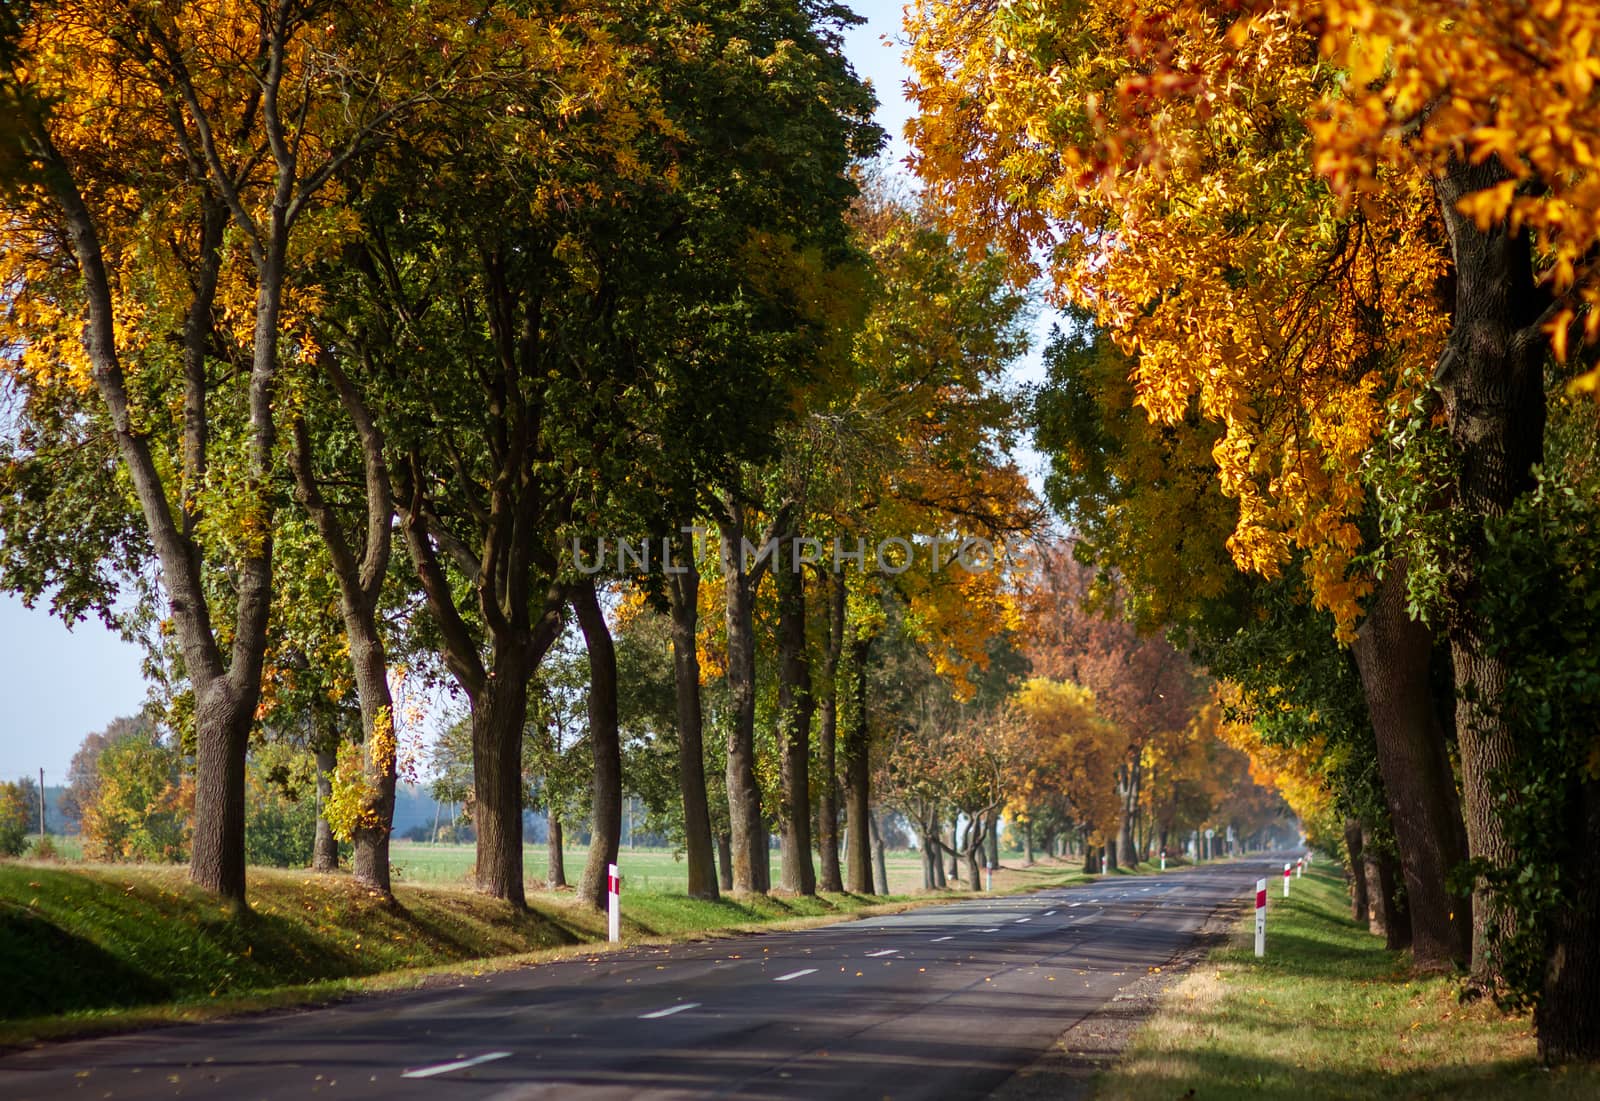 Paved asphalt road goes through forest with autumn trees in rural locality with concrete bollards. Sunny clear cloudless day without people and cars